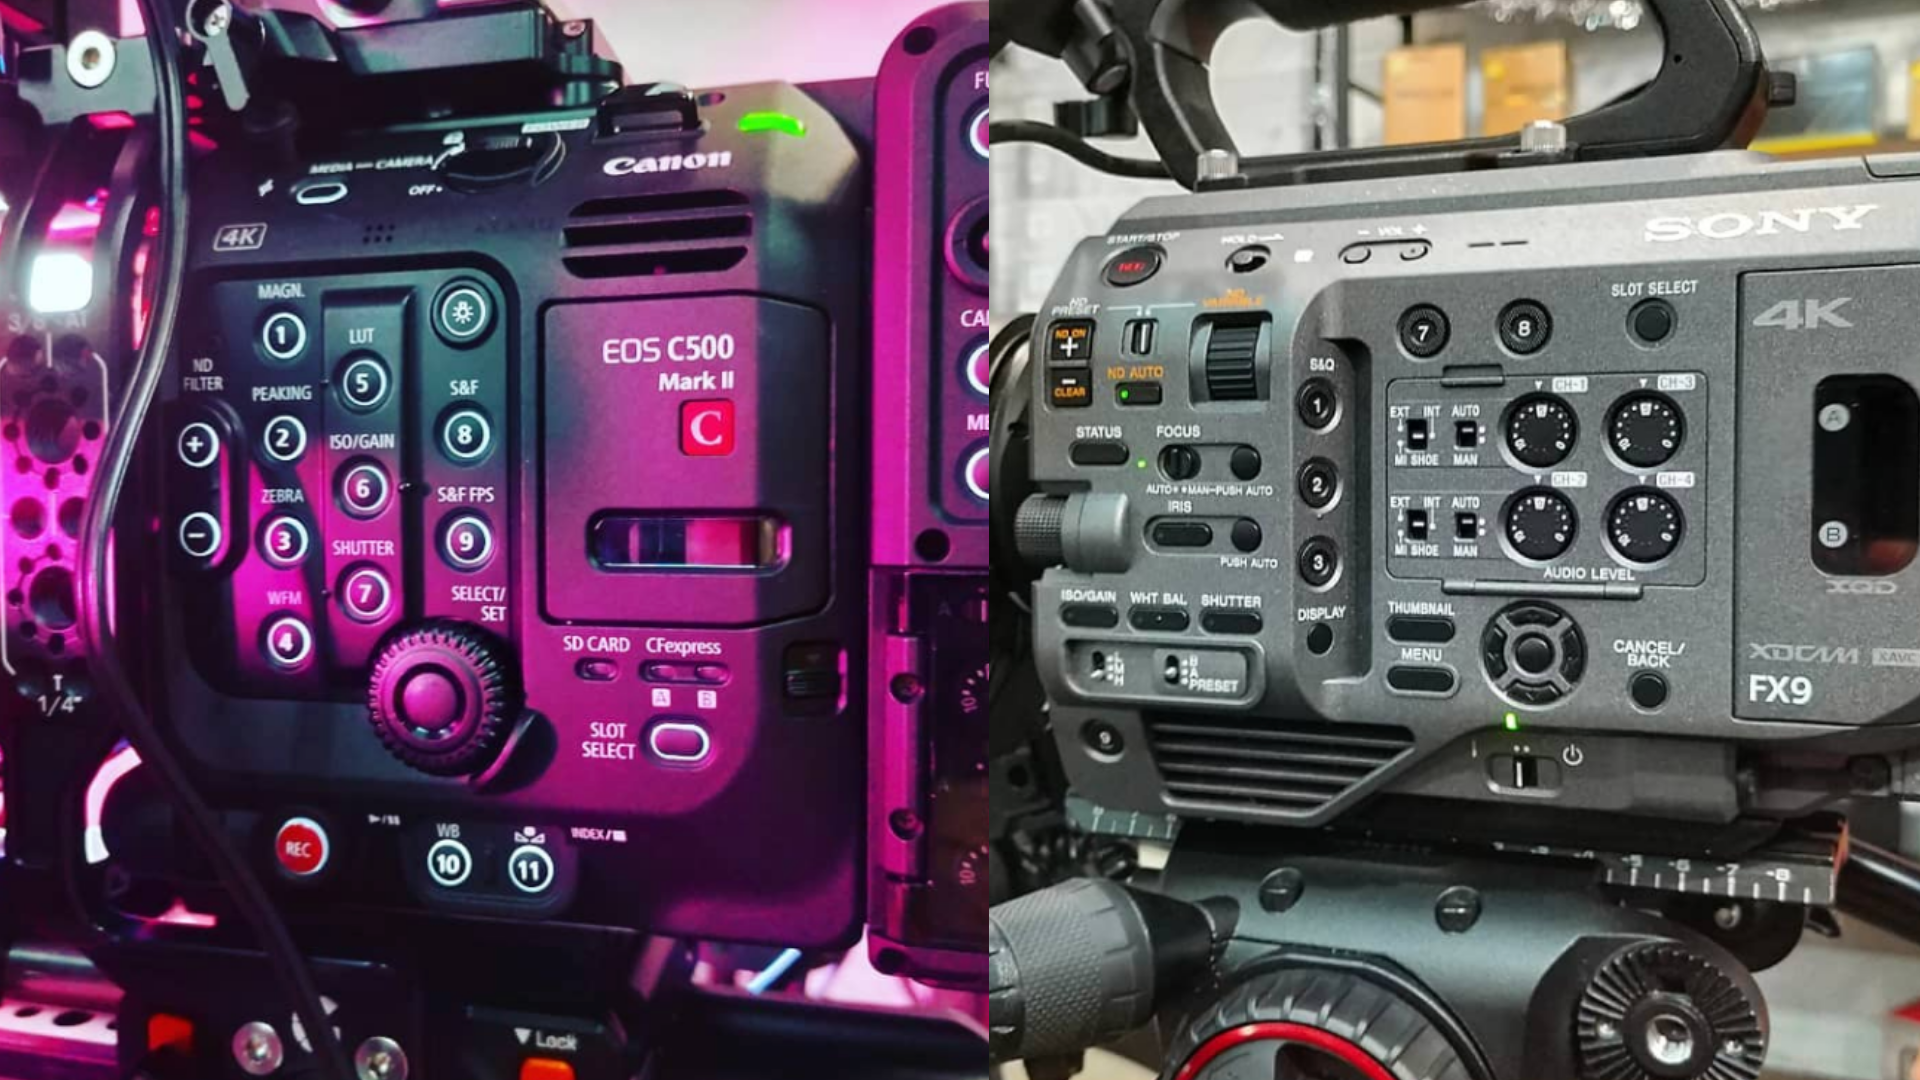 Stolpe sløring galning FX9 vs c500 II - First Impressions by Phil Holland — The Living Image